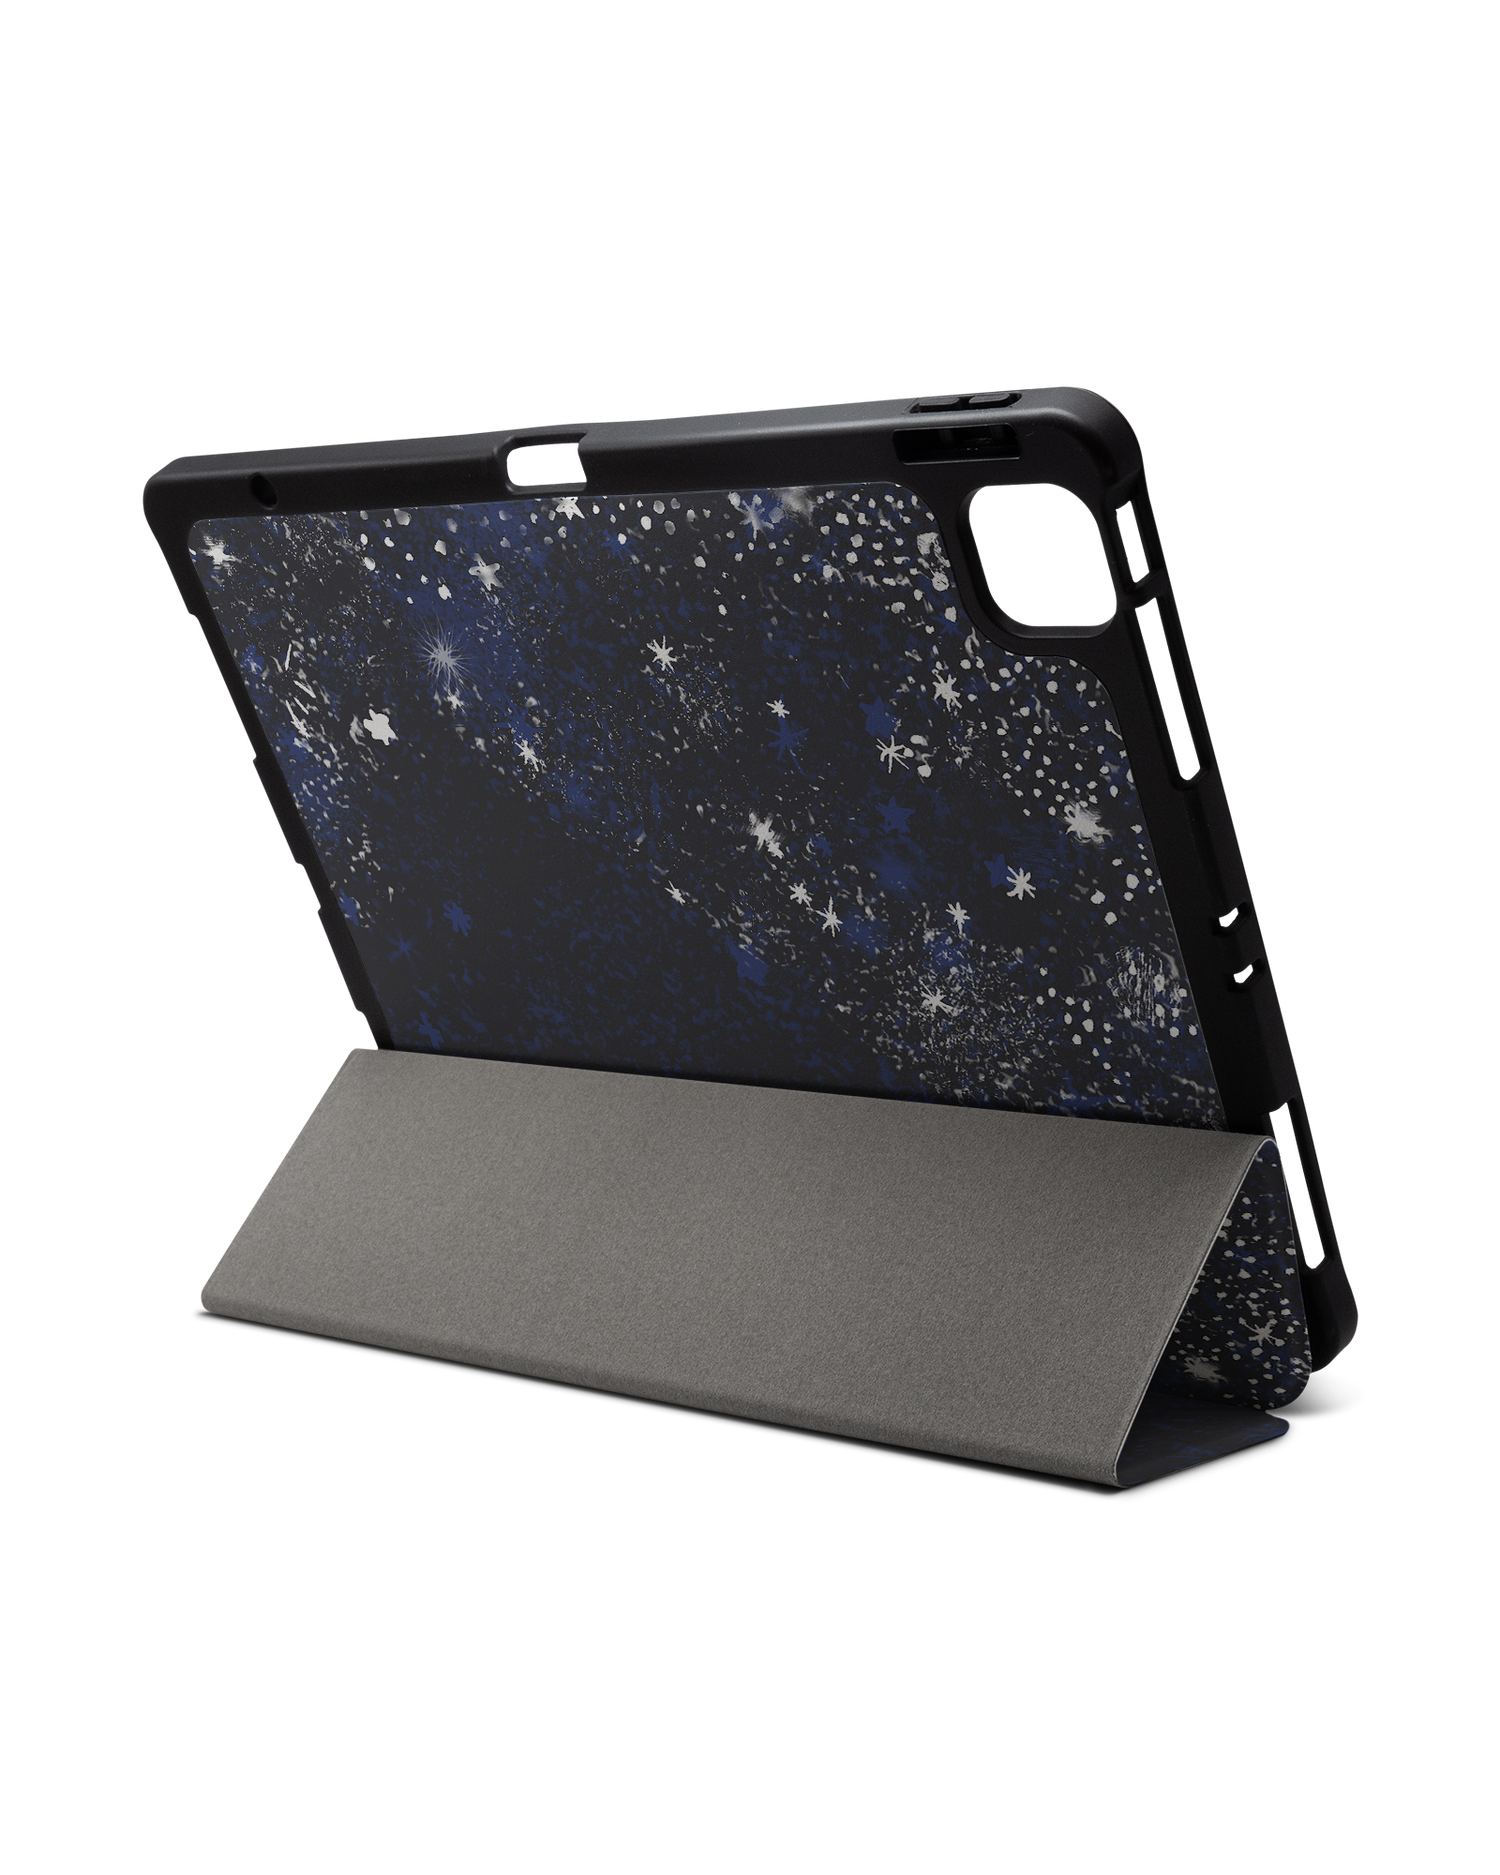 Starry Night Sky iPad Case with Pencil Holder for Apple iPad Pro 6 12.9